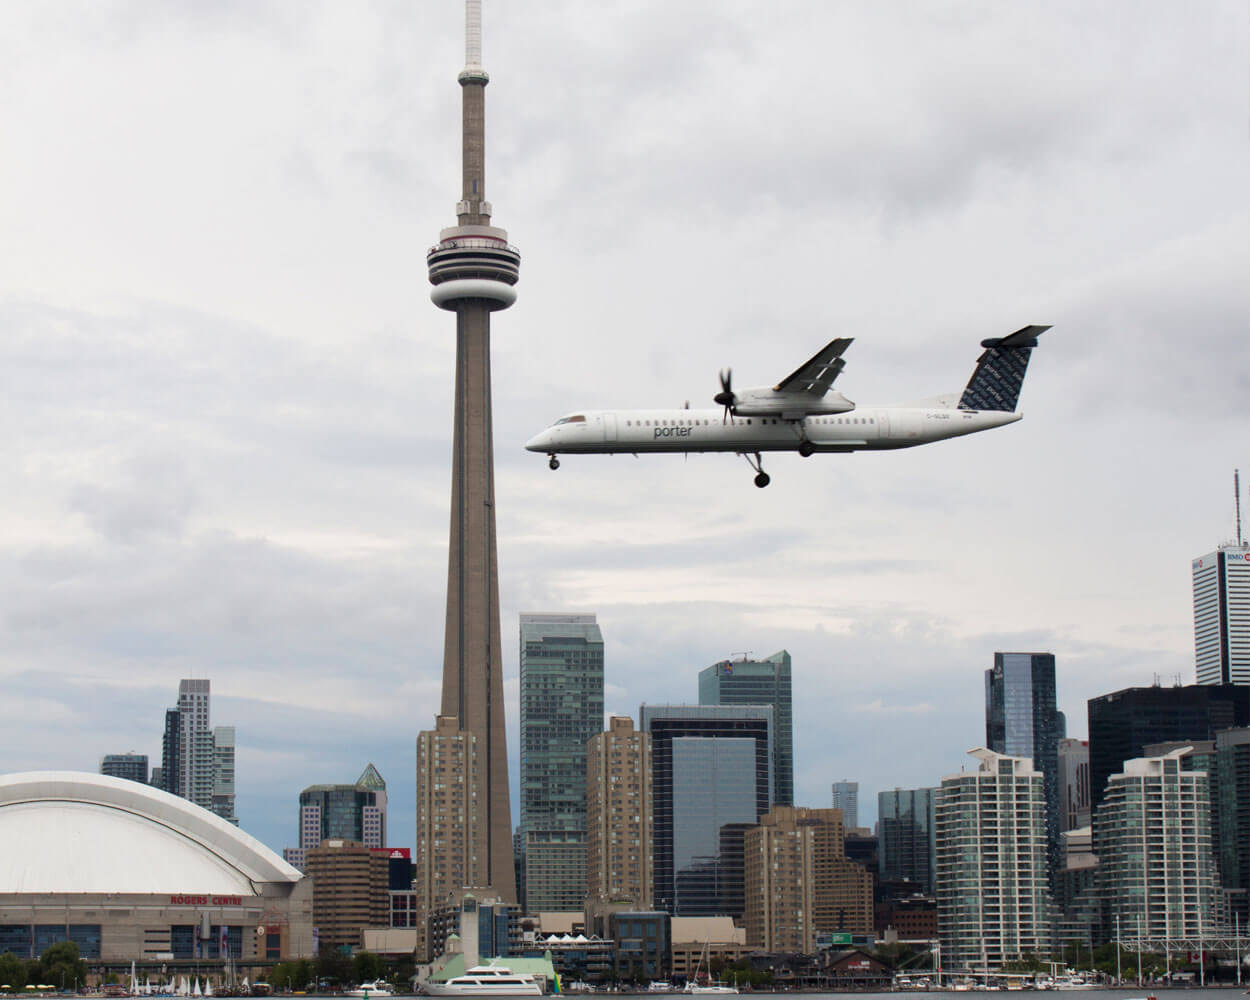 an airplane passes in front of the CN Tower and Toronto skyline, landing at the Toronto Island Airport